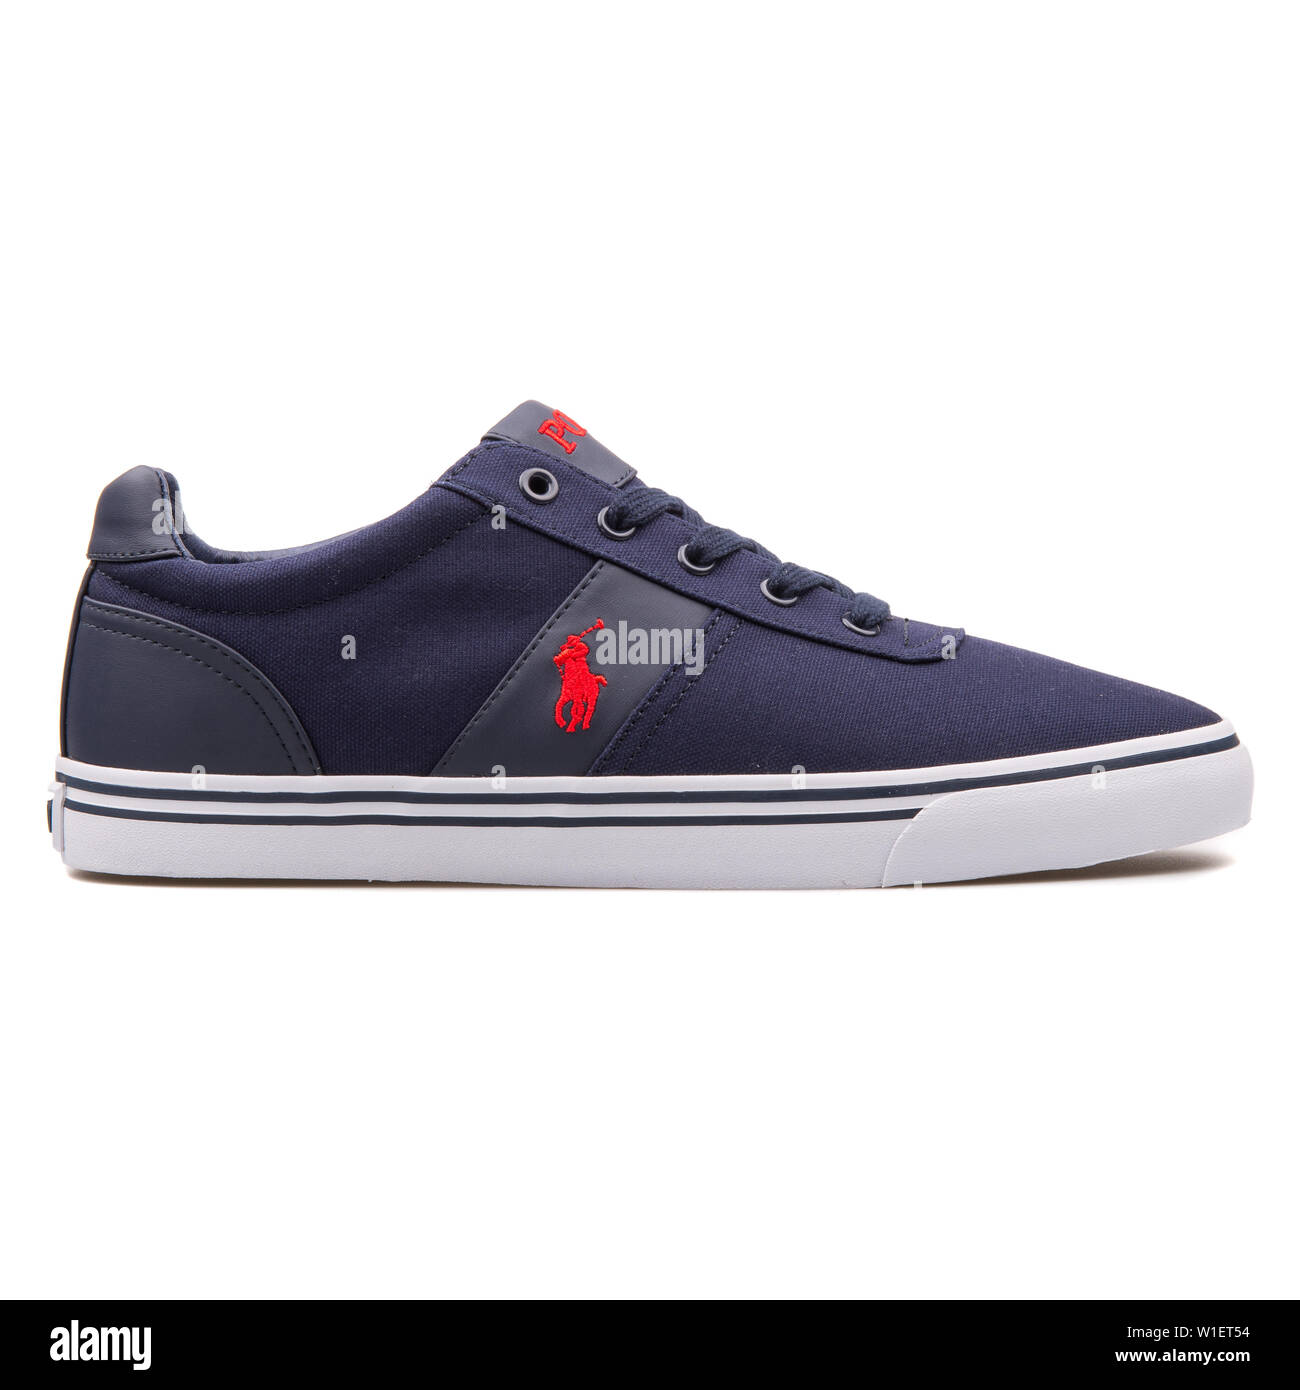 VIENNA, AUSTRIA - AUGUST 10, 2017: Polo Ralph Lauren Hanford navy blue and  red sneaker on white background Stock Photo - Alamy